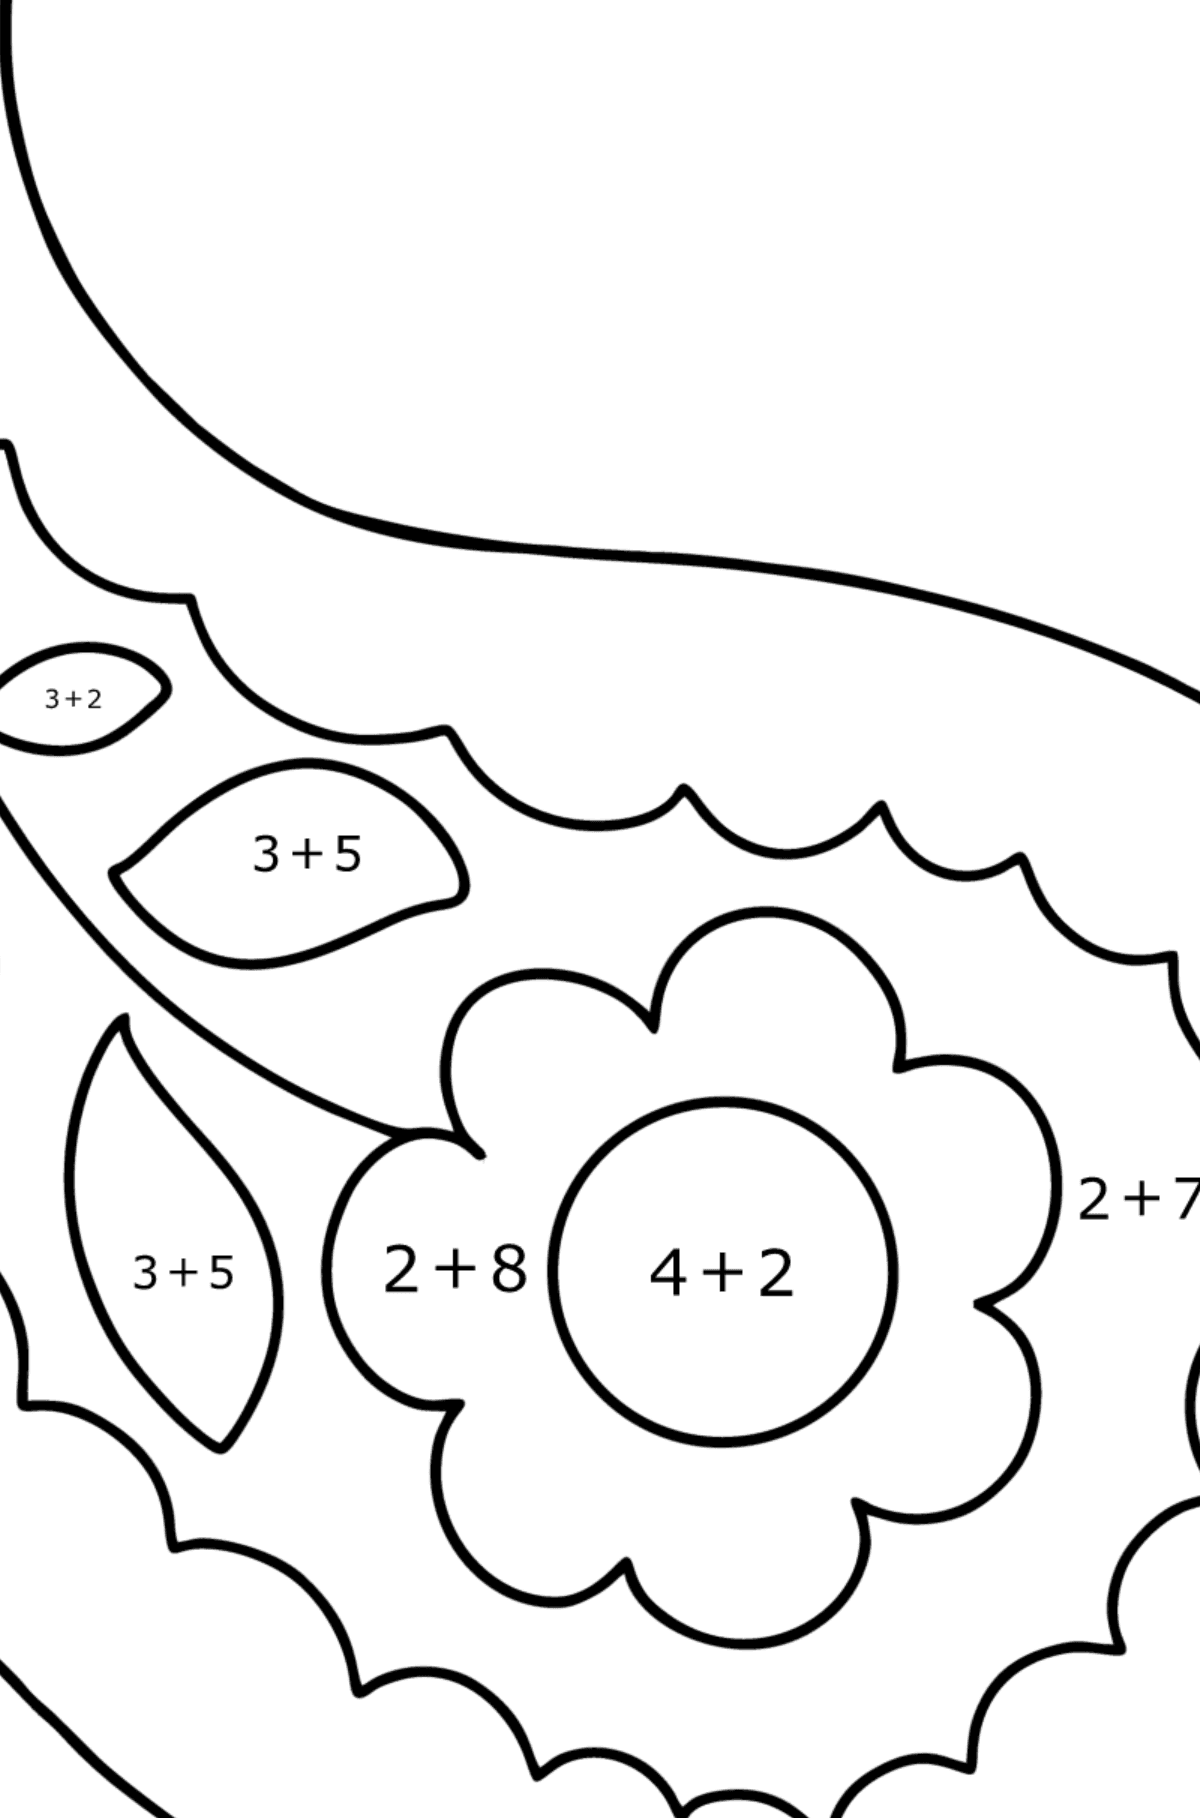 Paisley coloring page for baby - Math Coloring - Addition for Kids